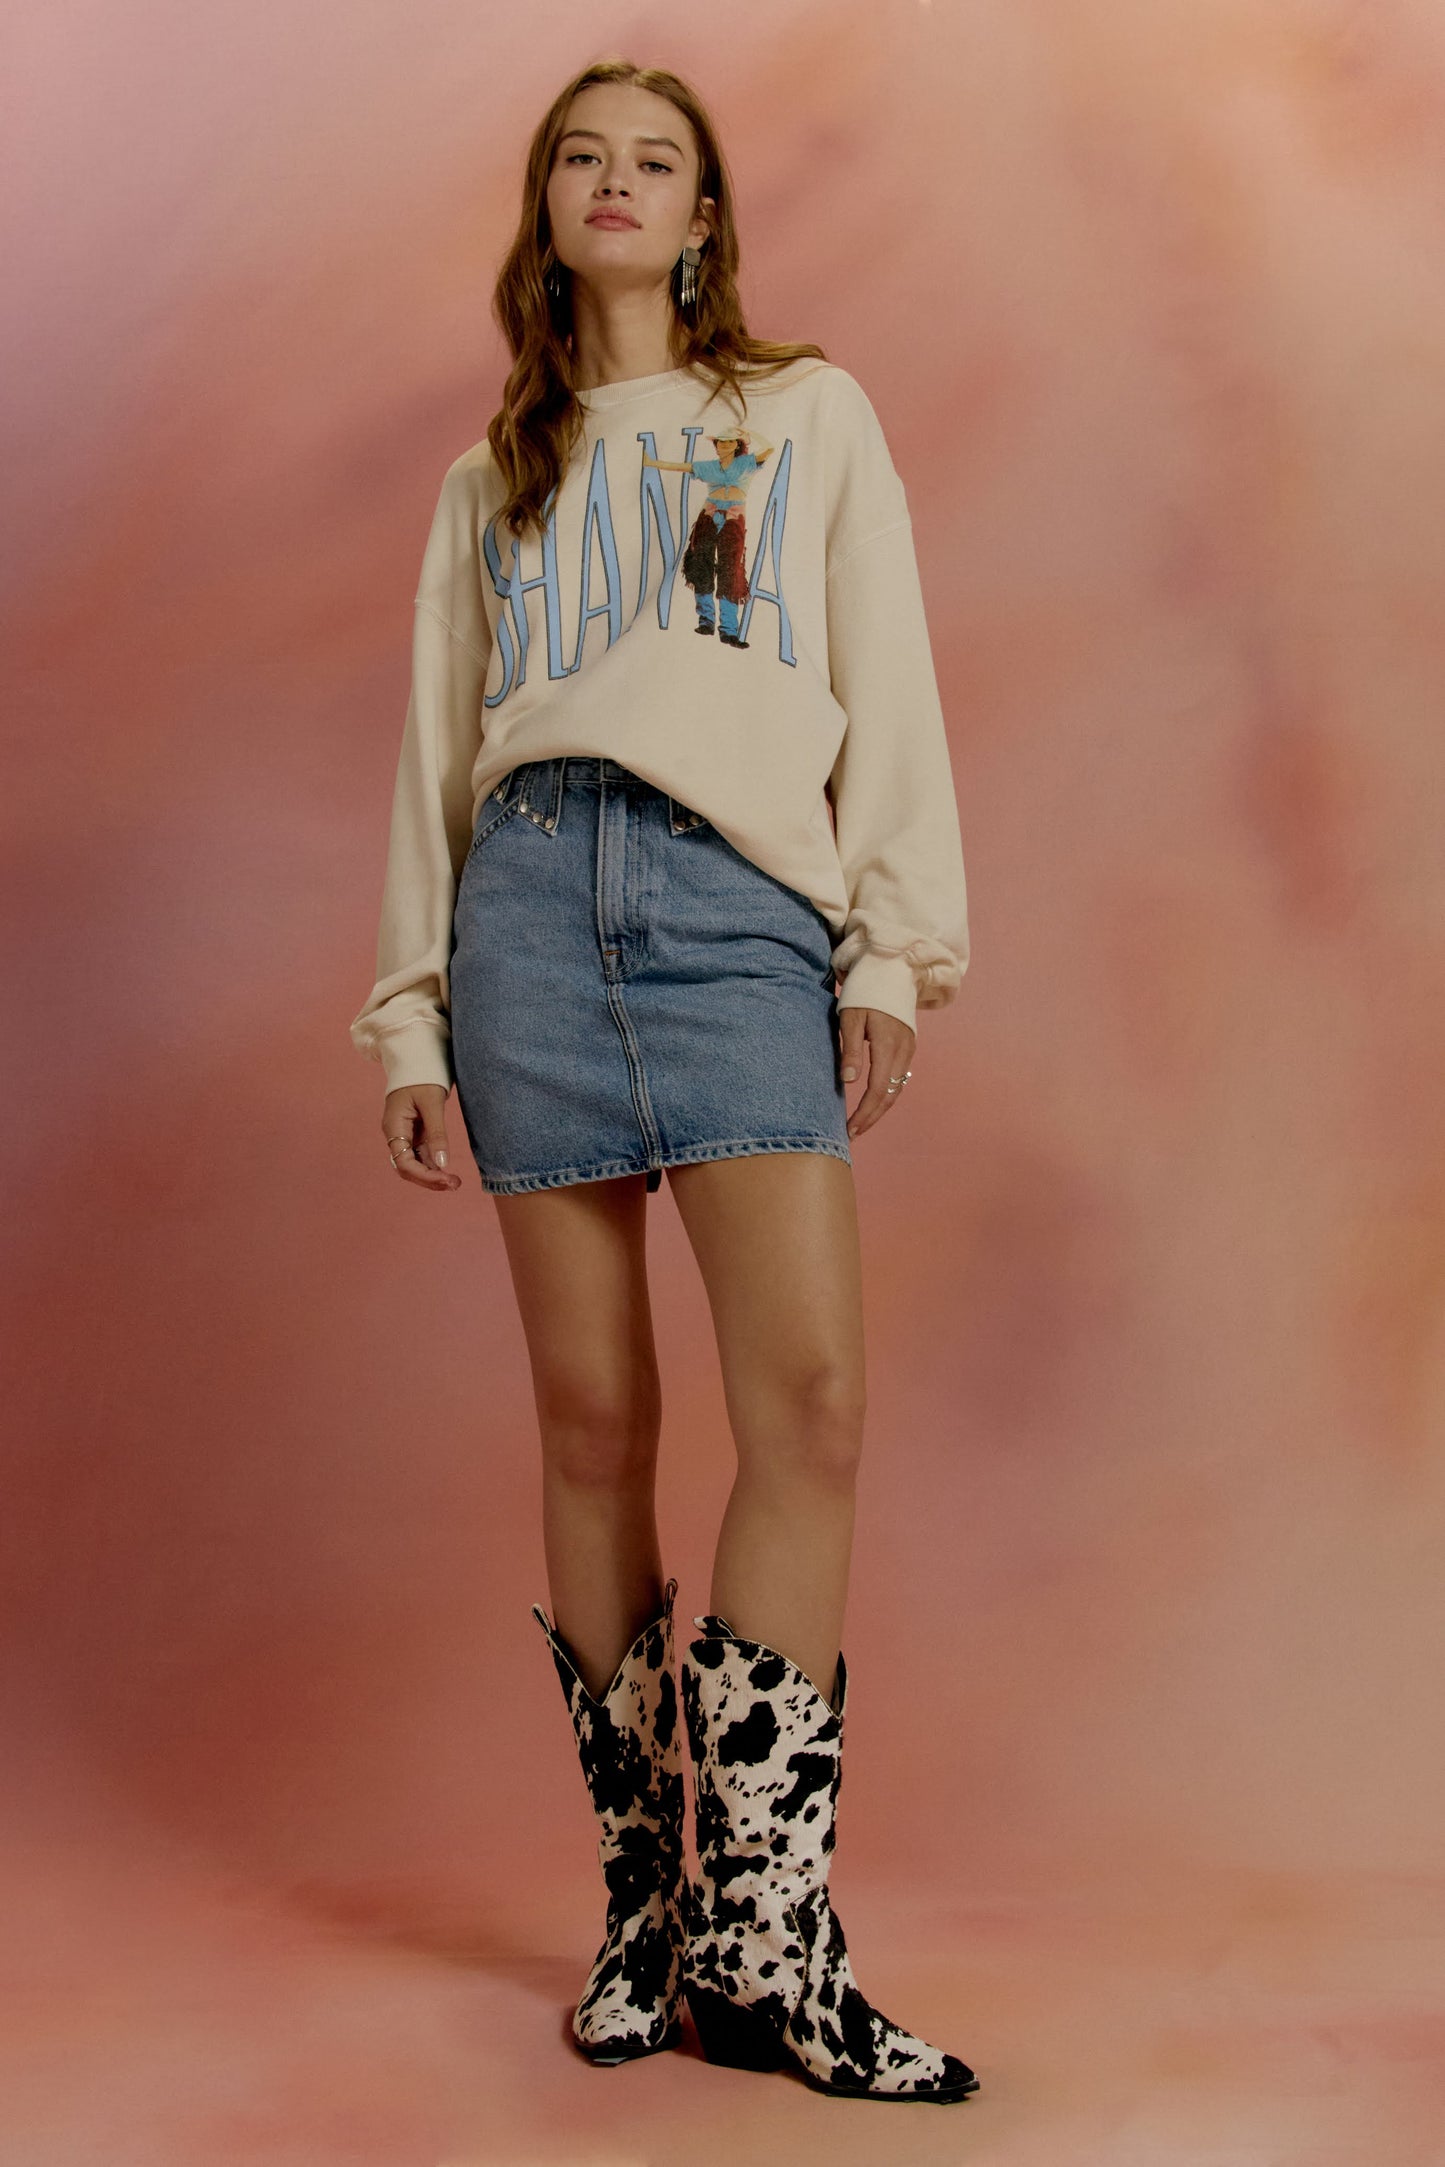 cowboy boots with denim skirt and crew